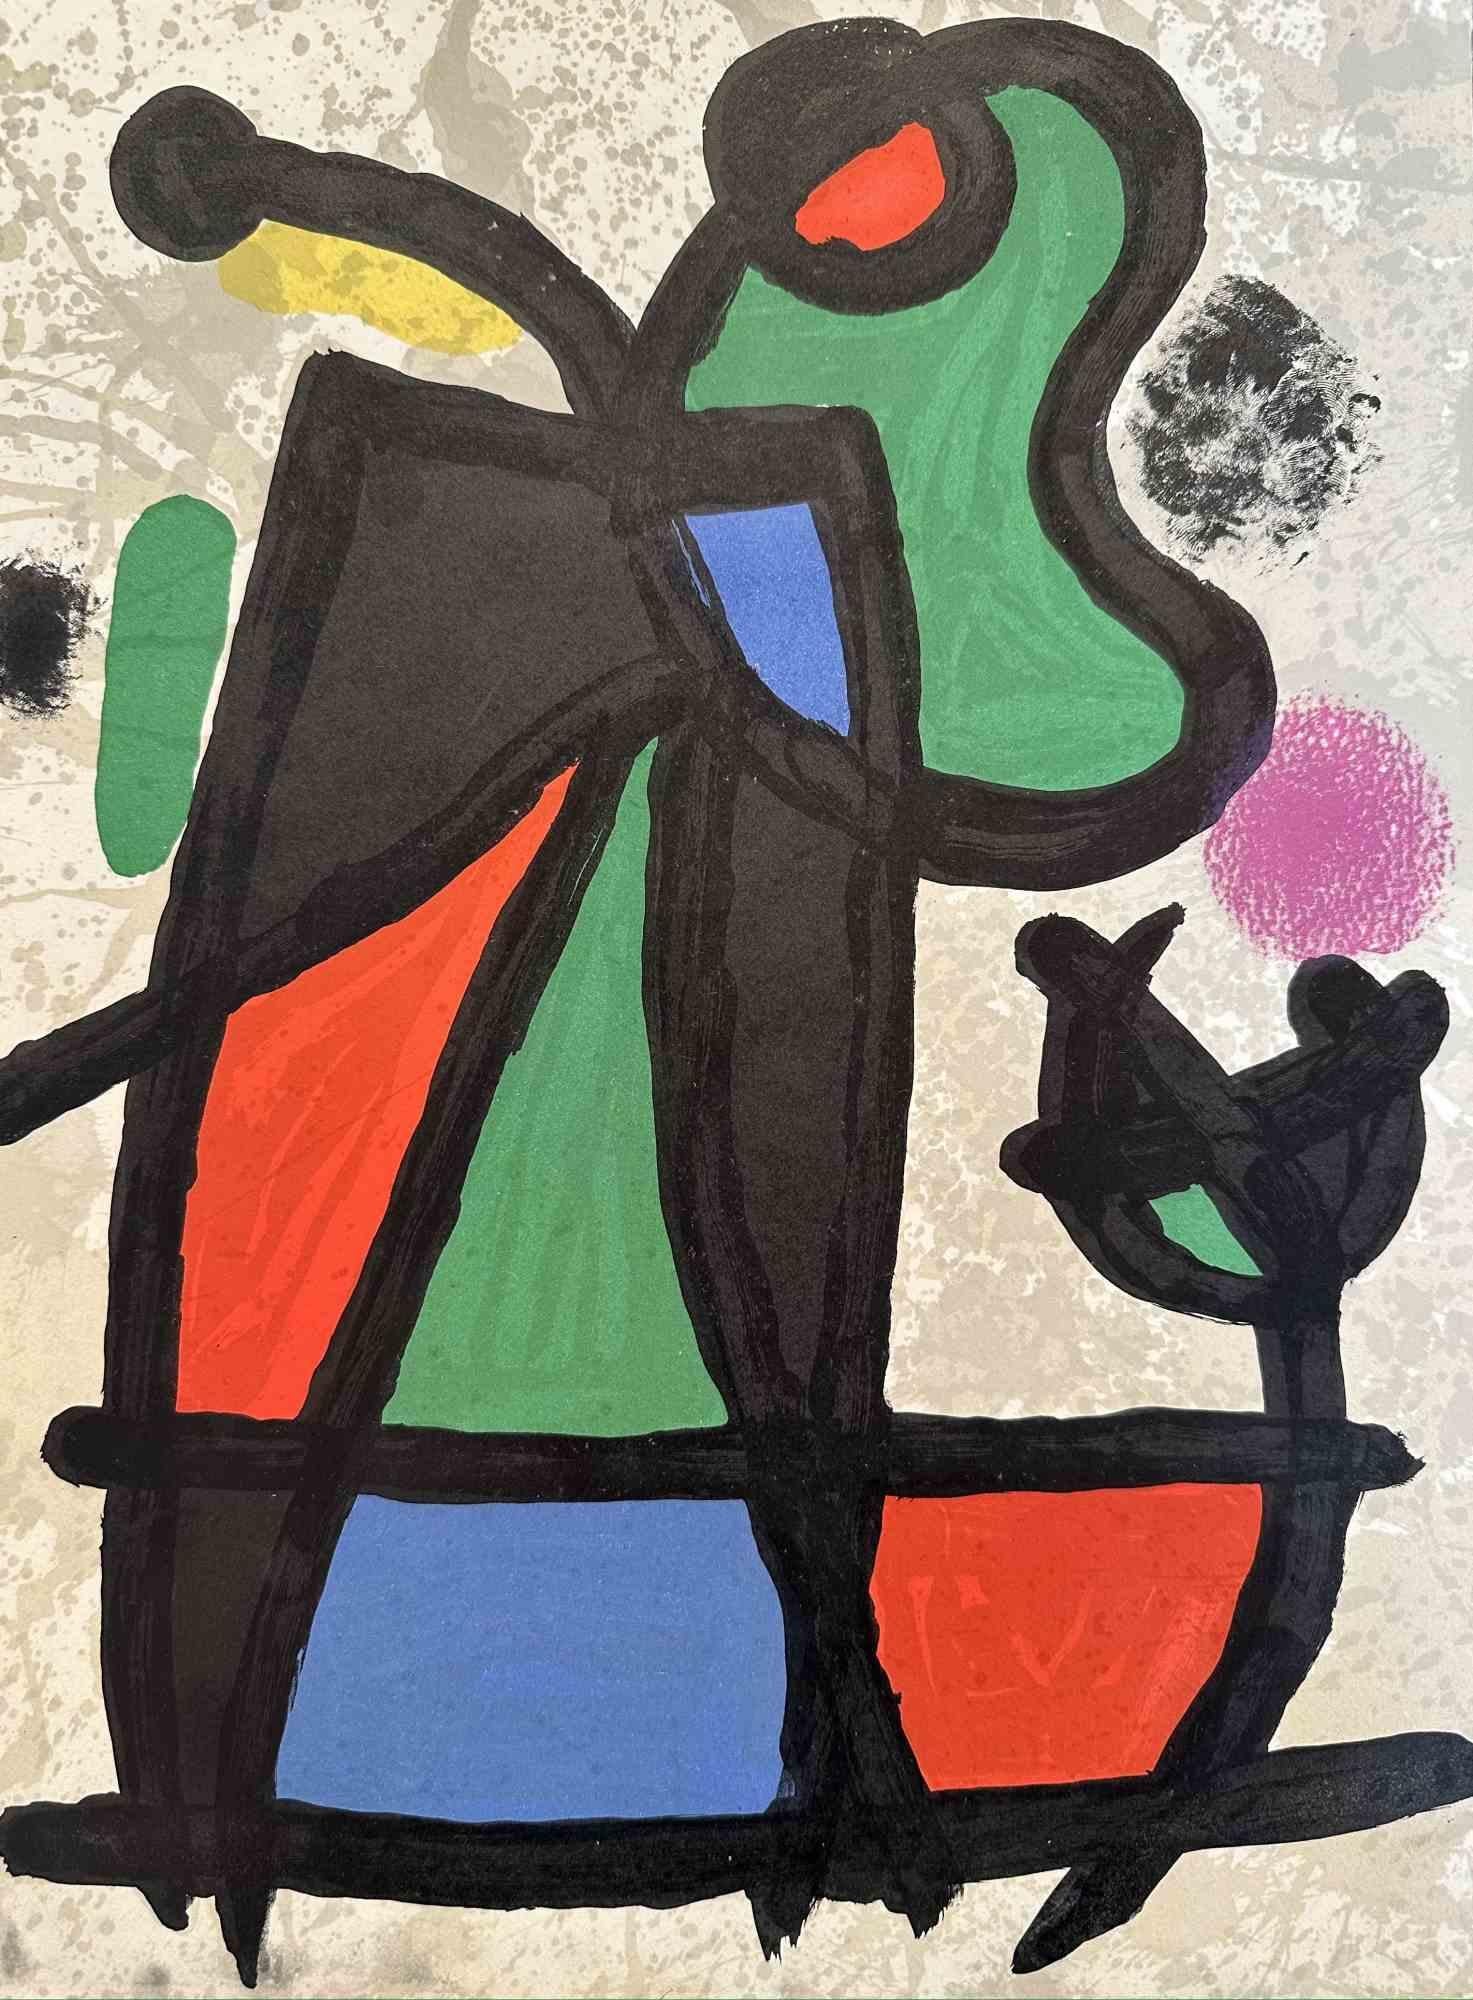 Joan Miró Abstract Print - Abstract Composition - Lithograph by Joan Mirò - 1963